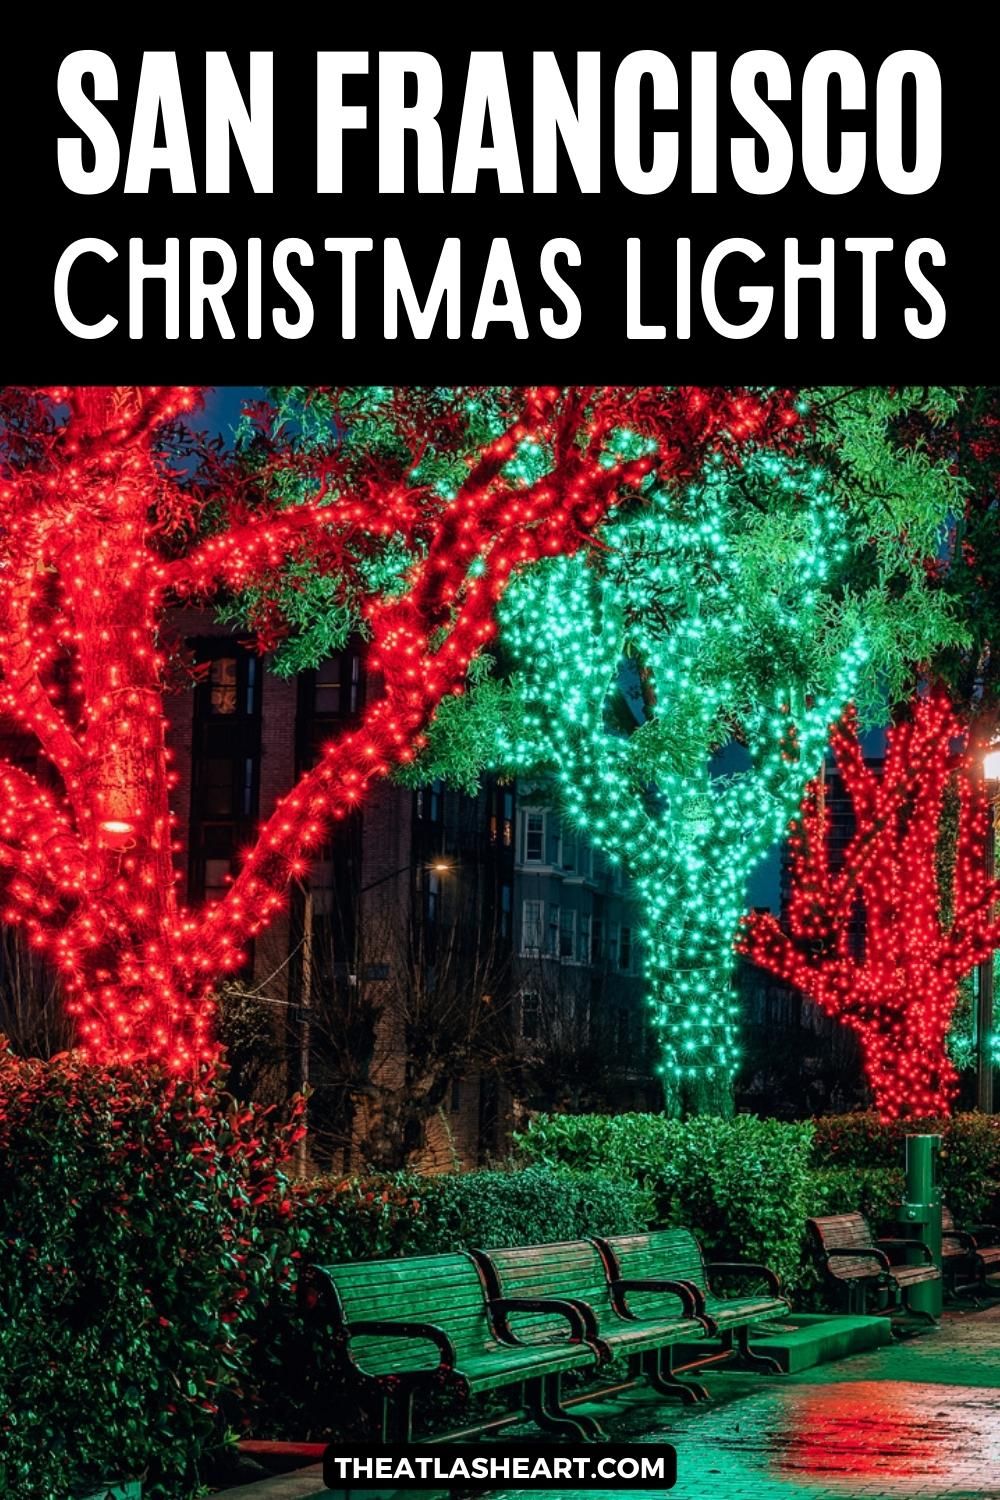 A grove of trees in a park at night with their trunks wrapped in red and green Christmas lights and benches beneath them, bathed in a green glow, with the text overlay, "Best Christmas Lights in San Francisco."